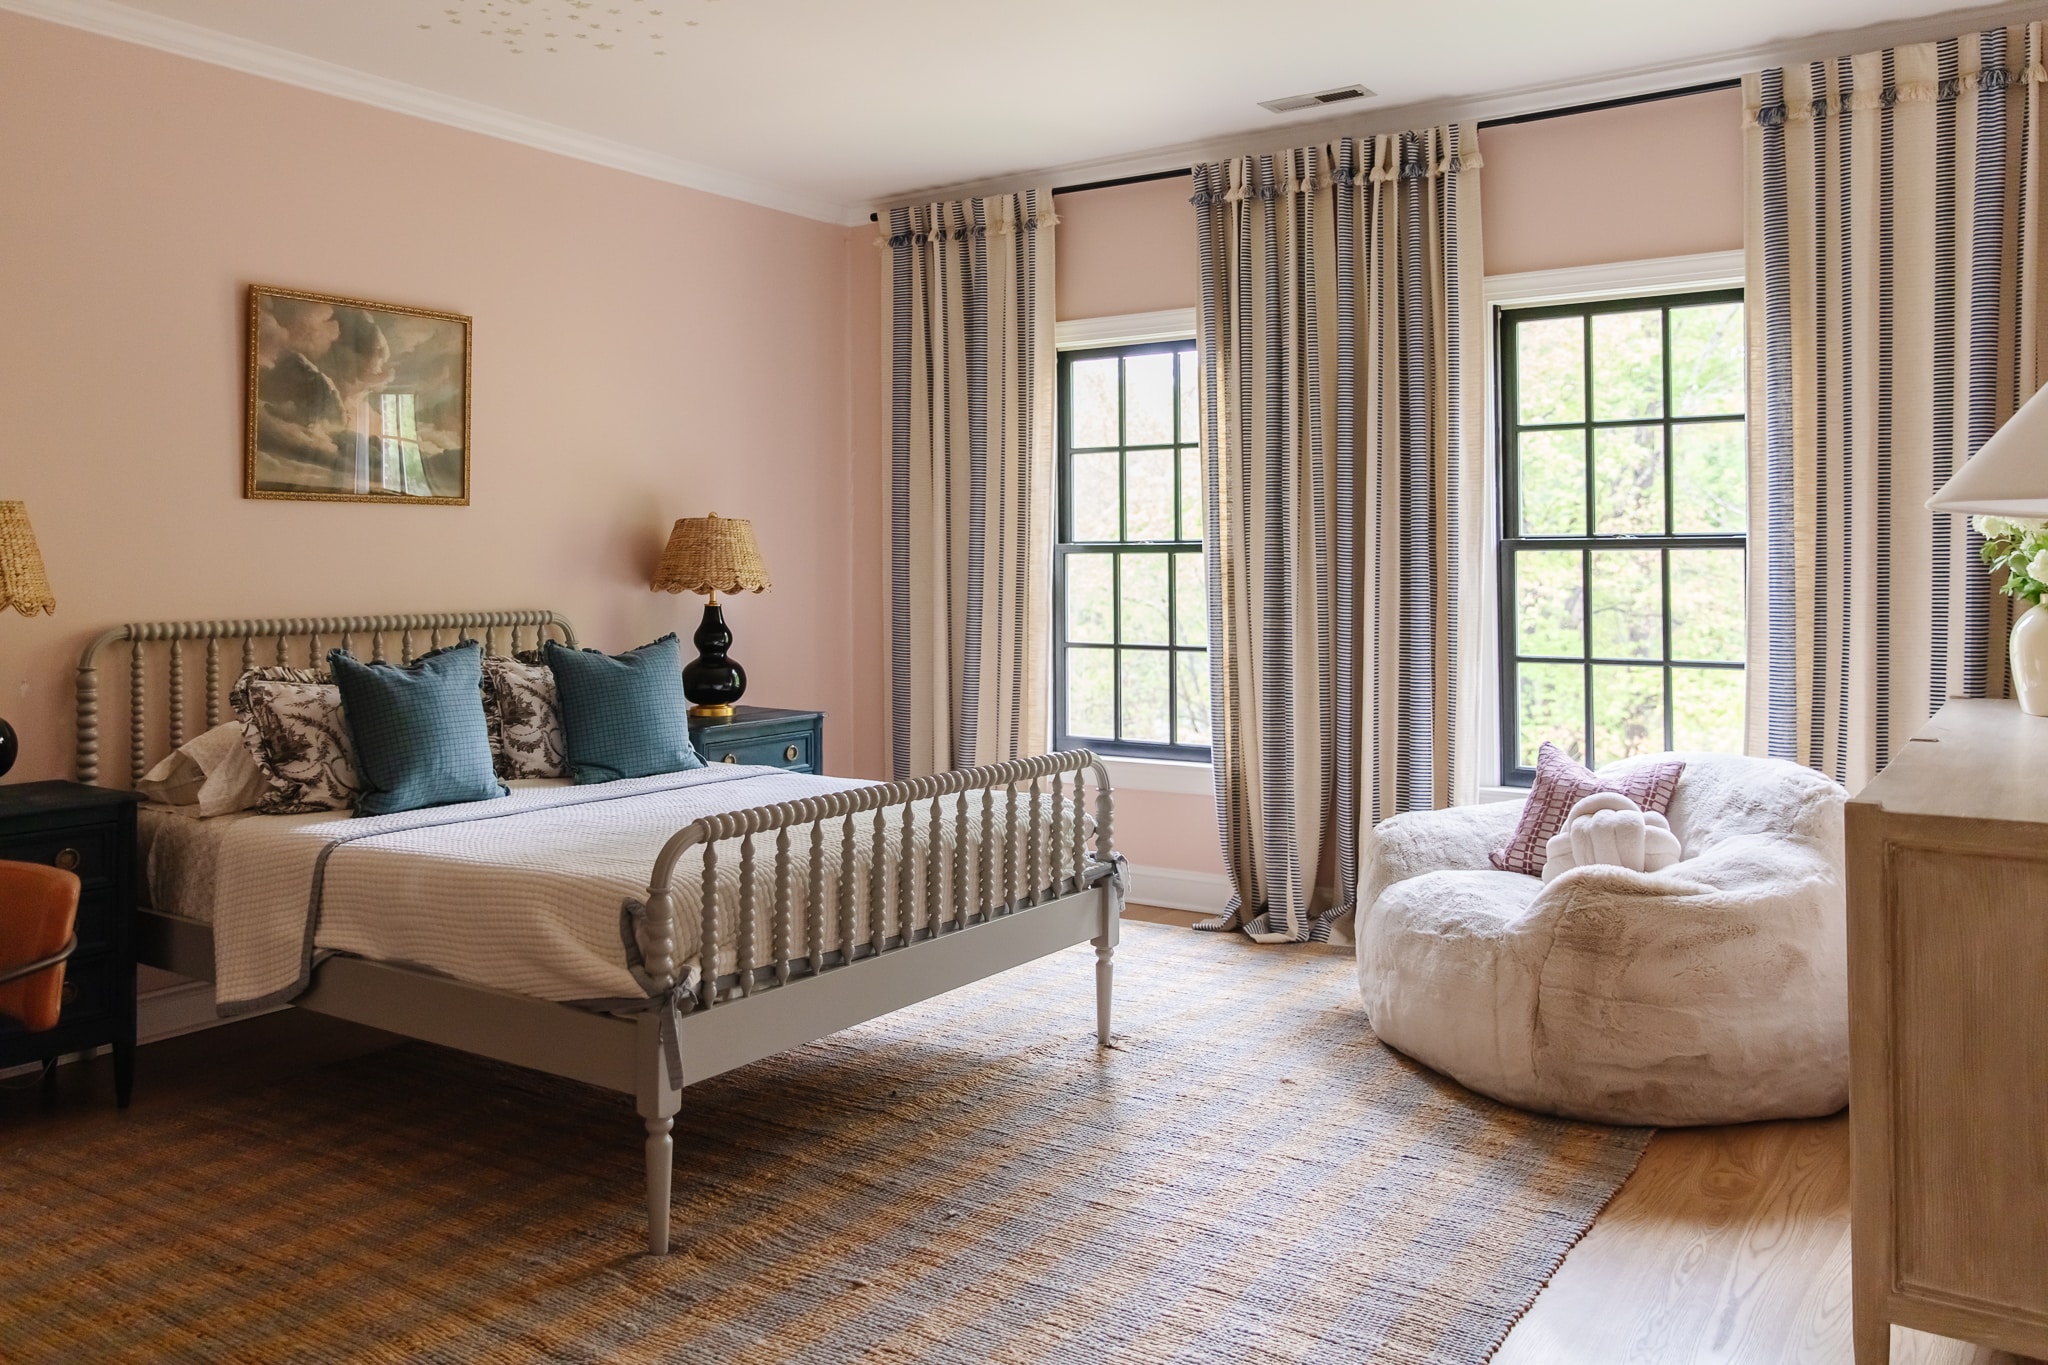 Chris Loves Julia | Greta's bedroom with pale pink paint, striped curtains and turned wood bed.